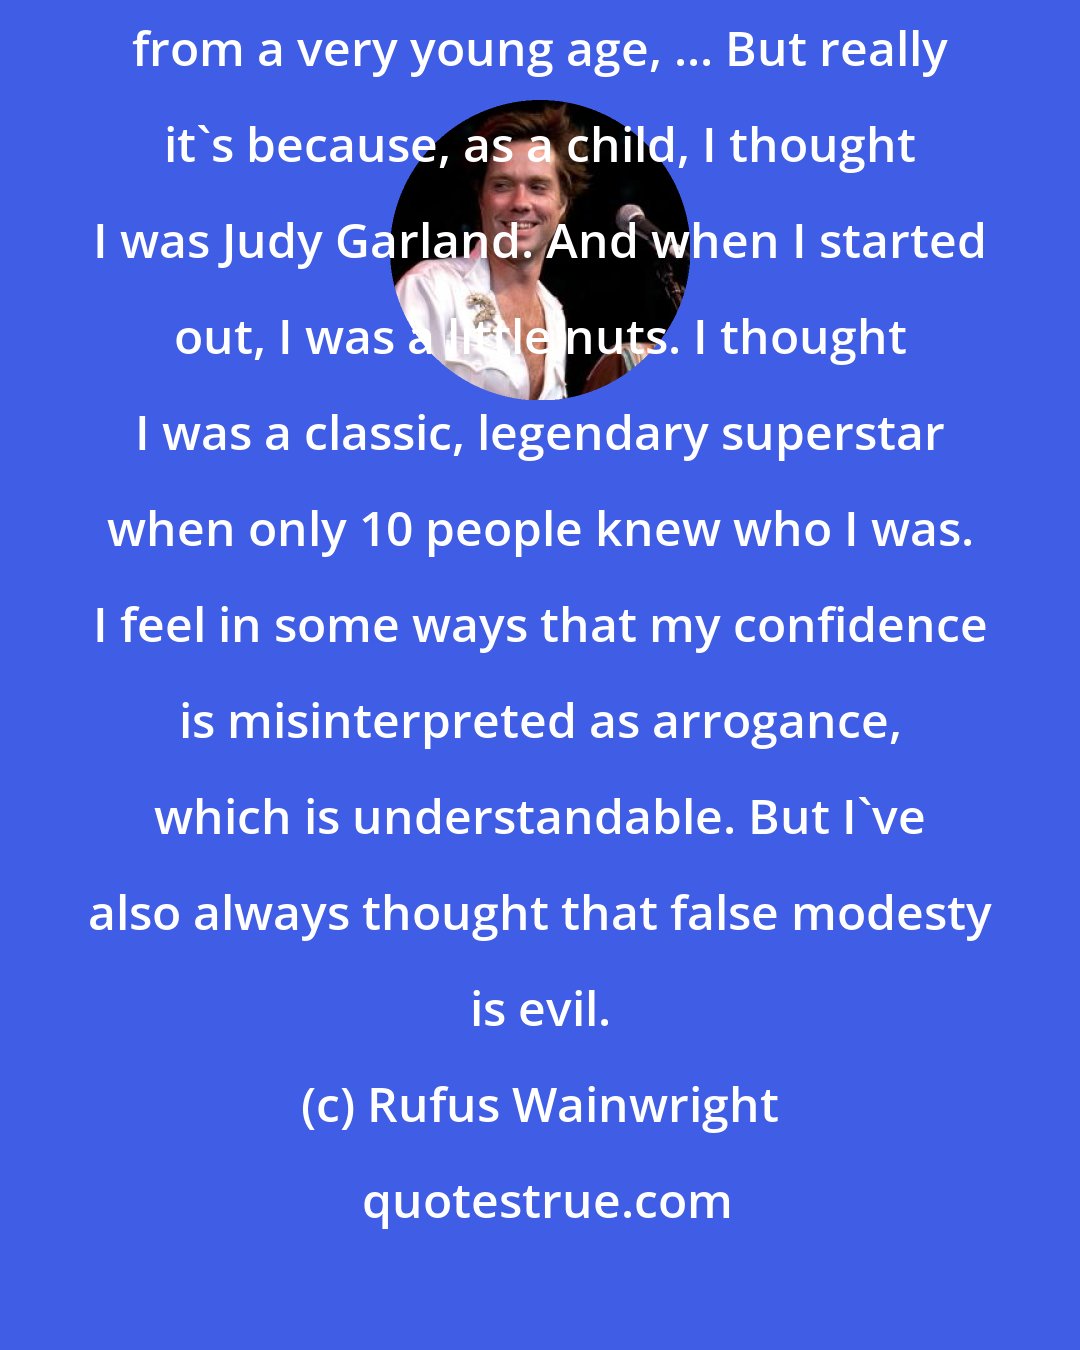 Rufus Wainwright: I definitely was always expected and encouraged to be a songwriter from a very young age, ... But really it's because, as a child, I thought I was Judy Garland. And when I started out, I was a little nuts. I thought I was a classic, legendary superstar when only 10 people knew who I was. I feel in some ways that my confidence is misinterpreted as arrogance, which is understandable. But I've also always thought that false modesty is evil.